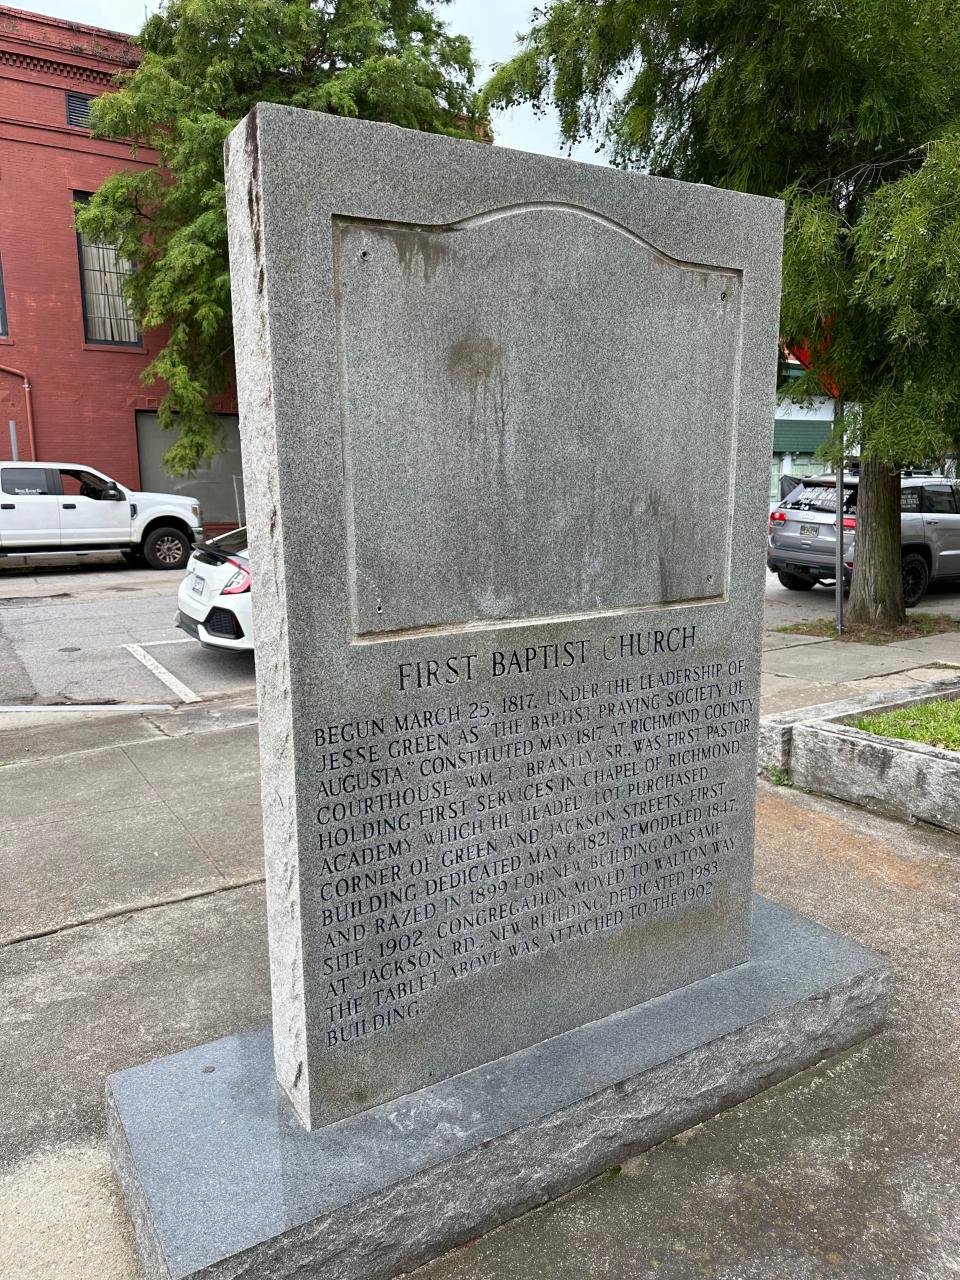 The bronze plaque was stolen off of the marker at the old First Baptist Church on Greene Street in Augusta.